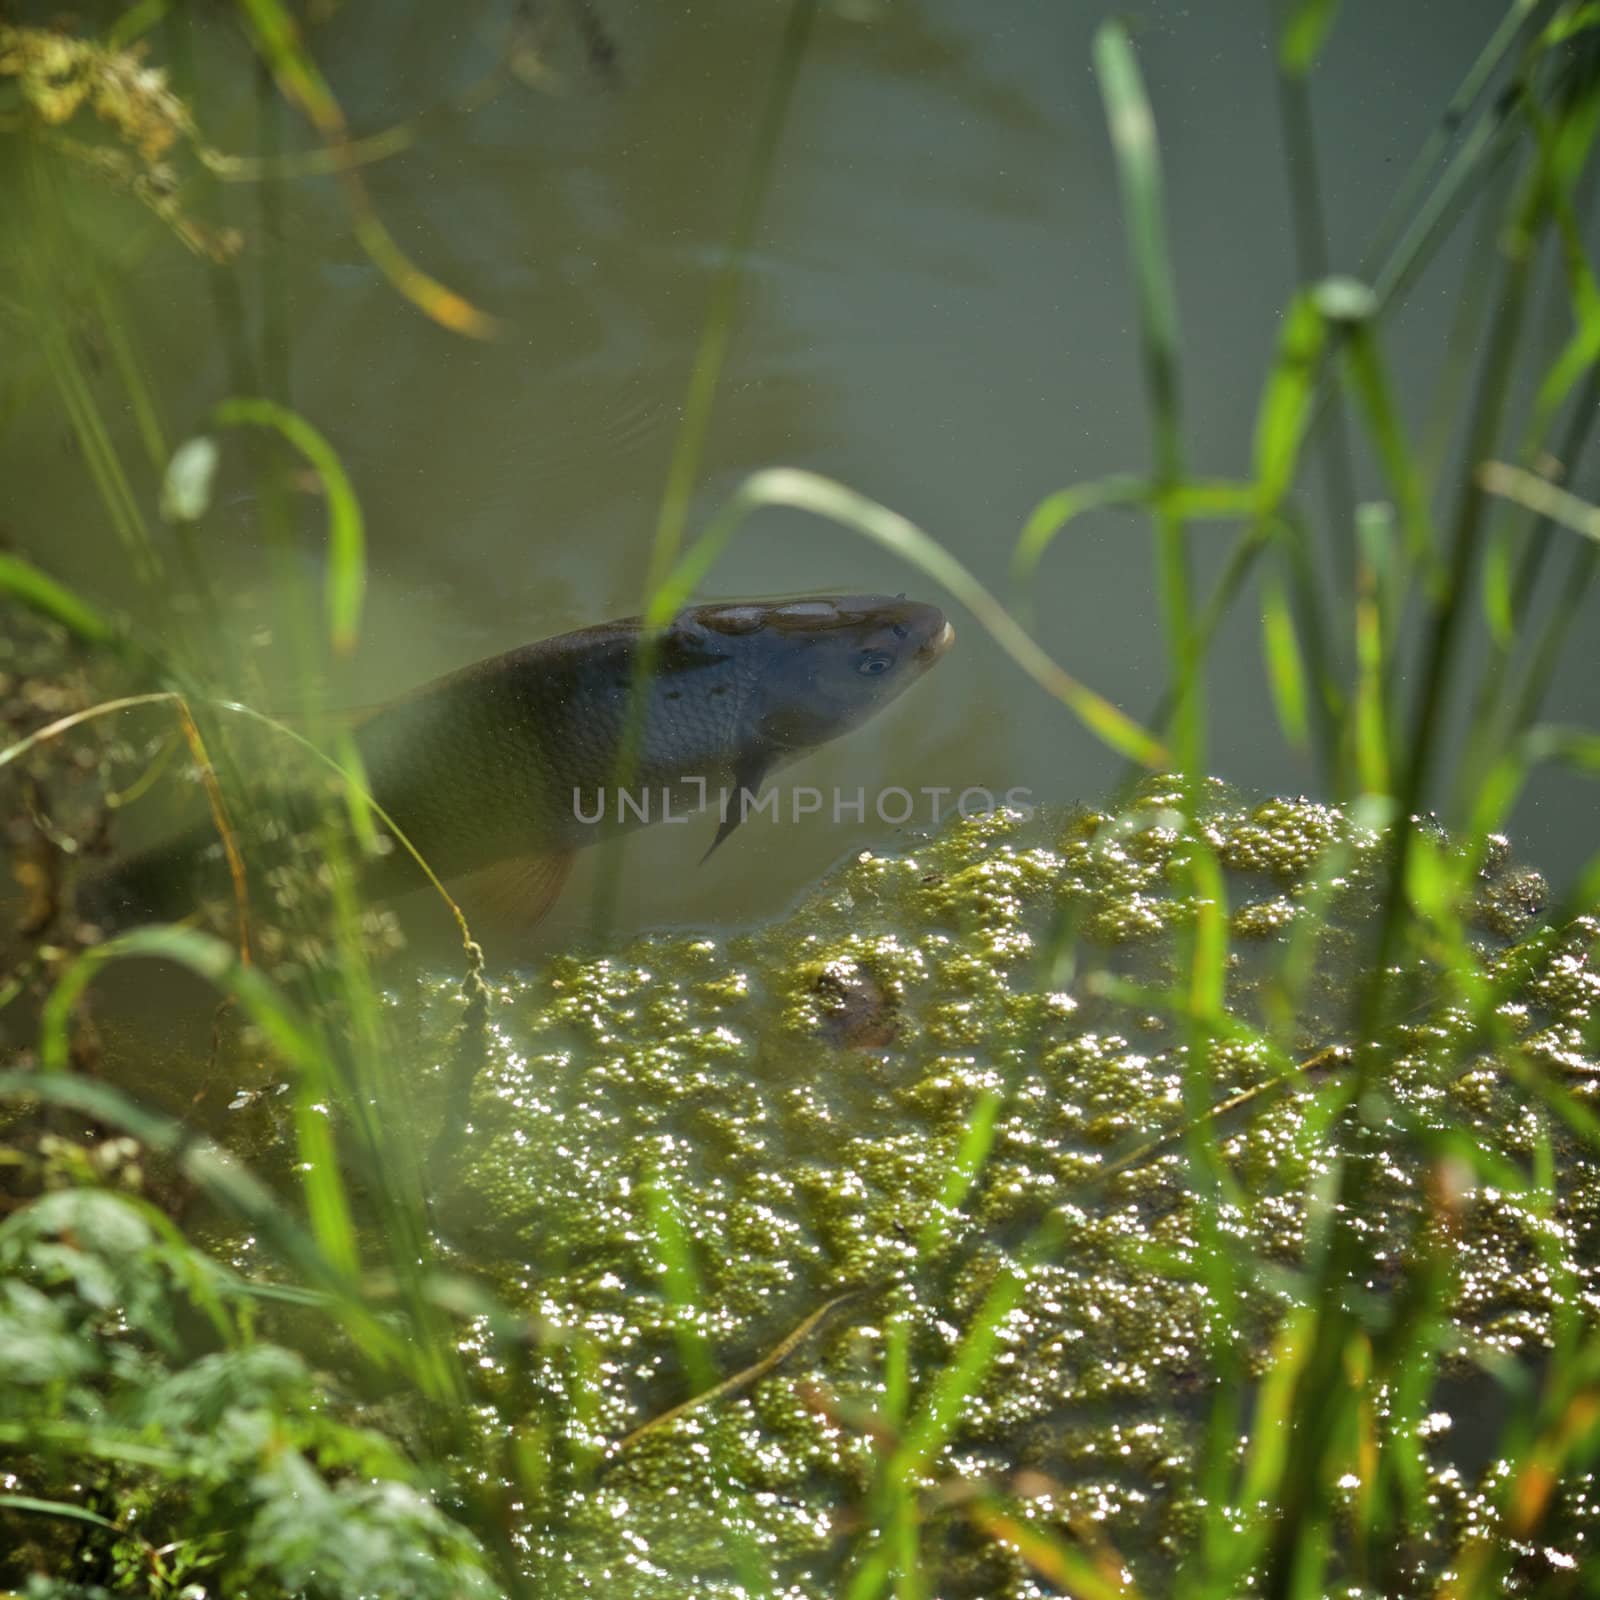 carp fish in water of small pond